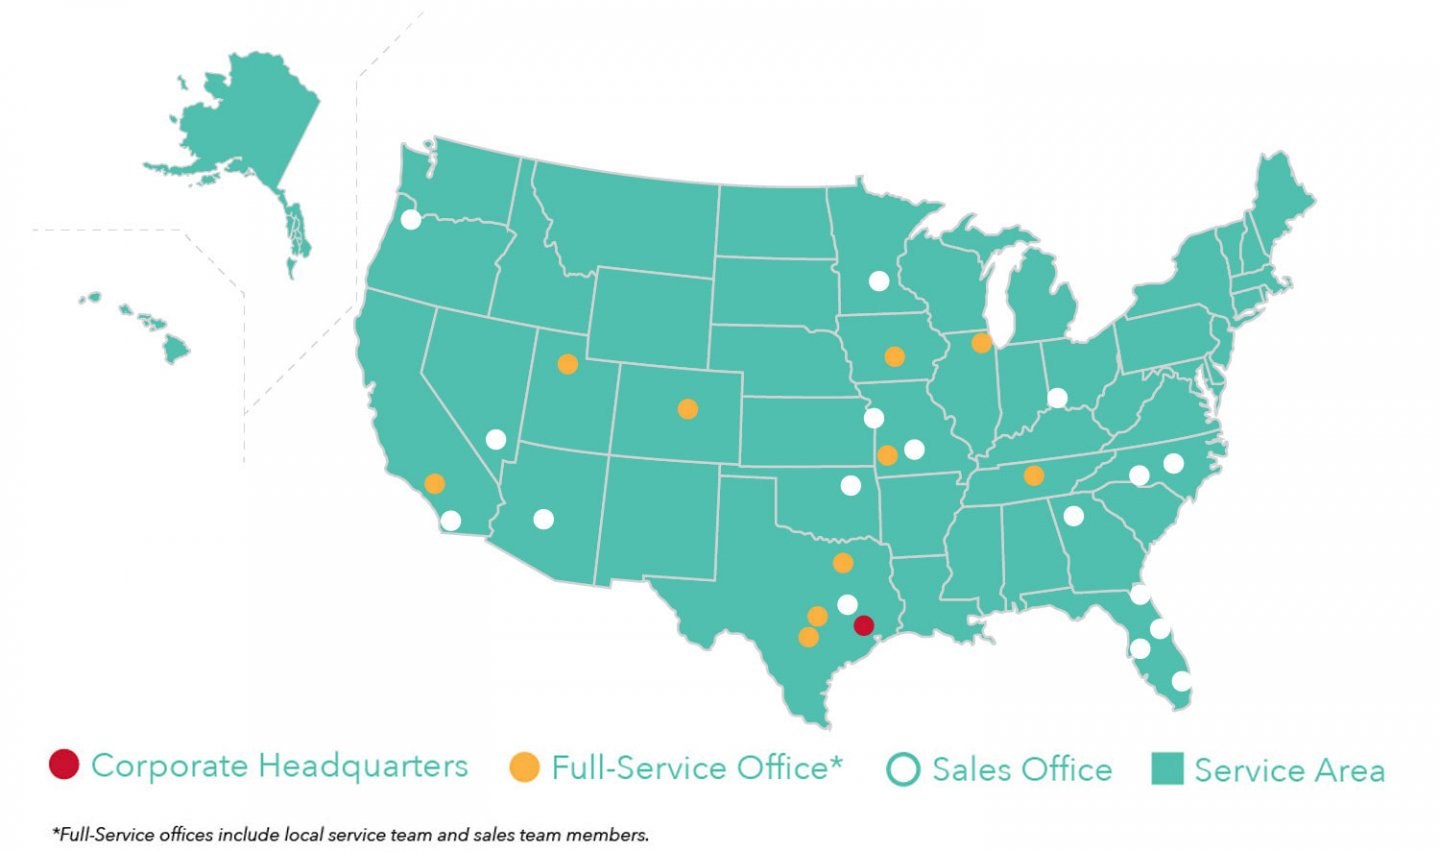 Map of United States showing G&A Partners' office locations and service centers.